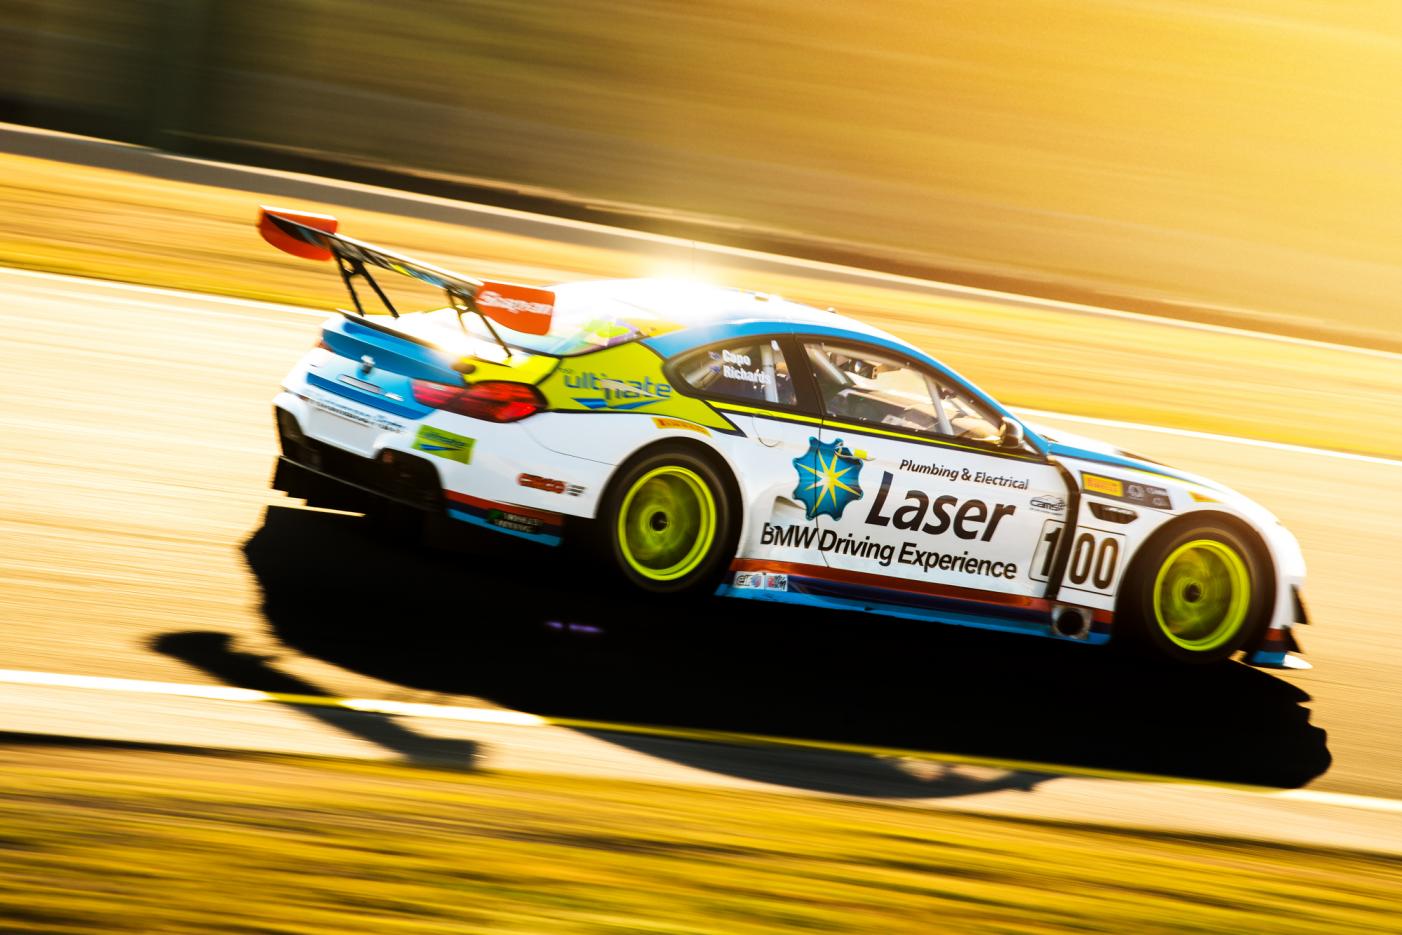 Front-running pace and Top 10 results for BMW Team SRM in Sydney